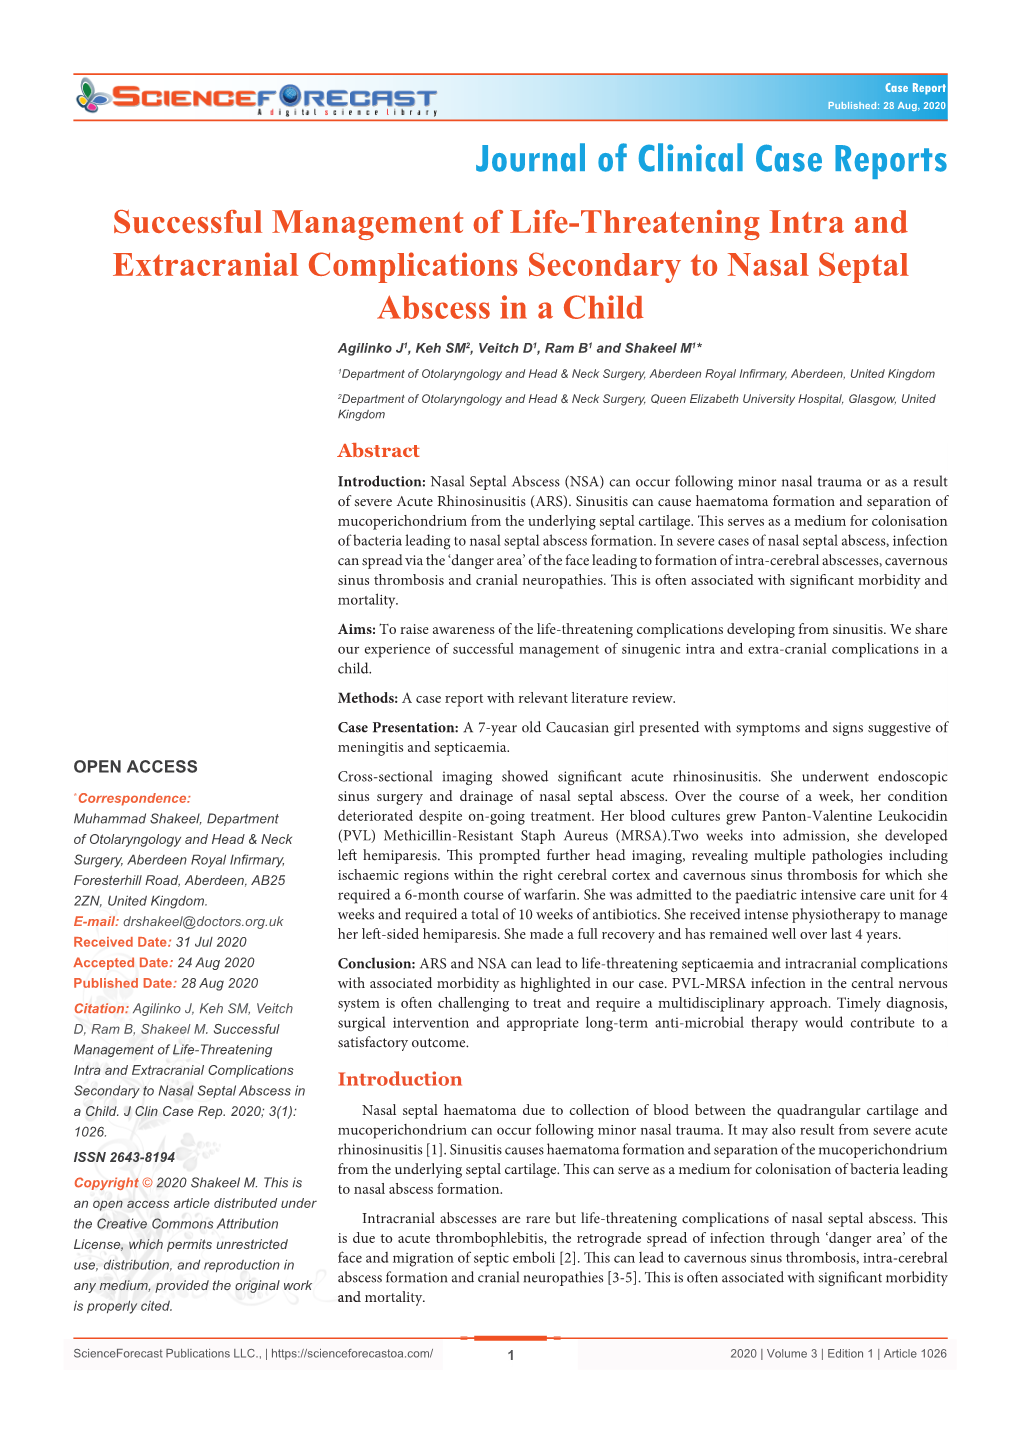 Successful Management of Life-Threatening Intra and Extracranial Complications Secondary to Nasal Septal Abscess in a Child